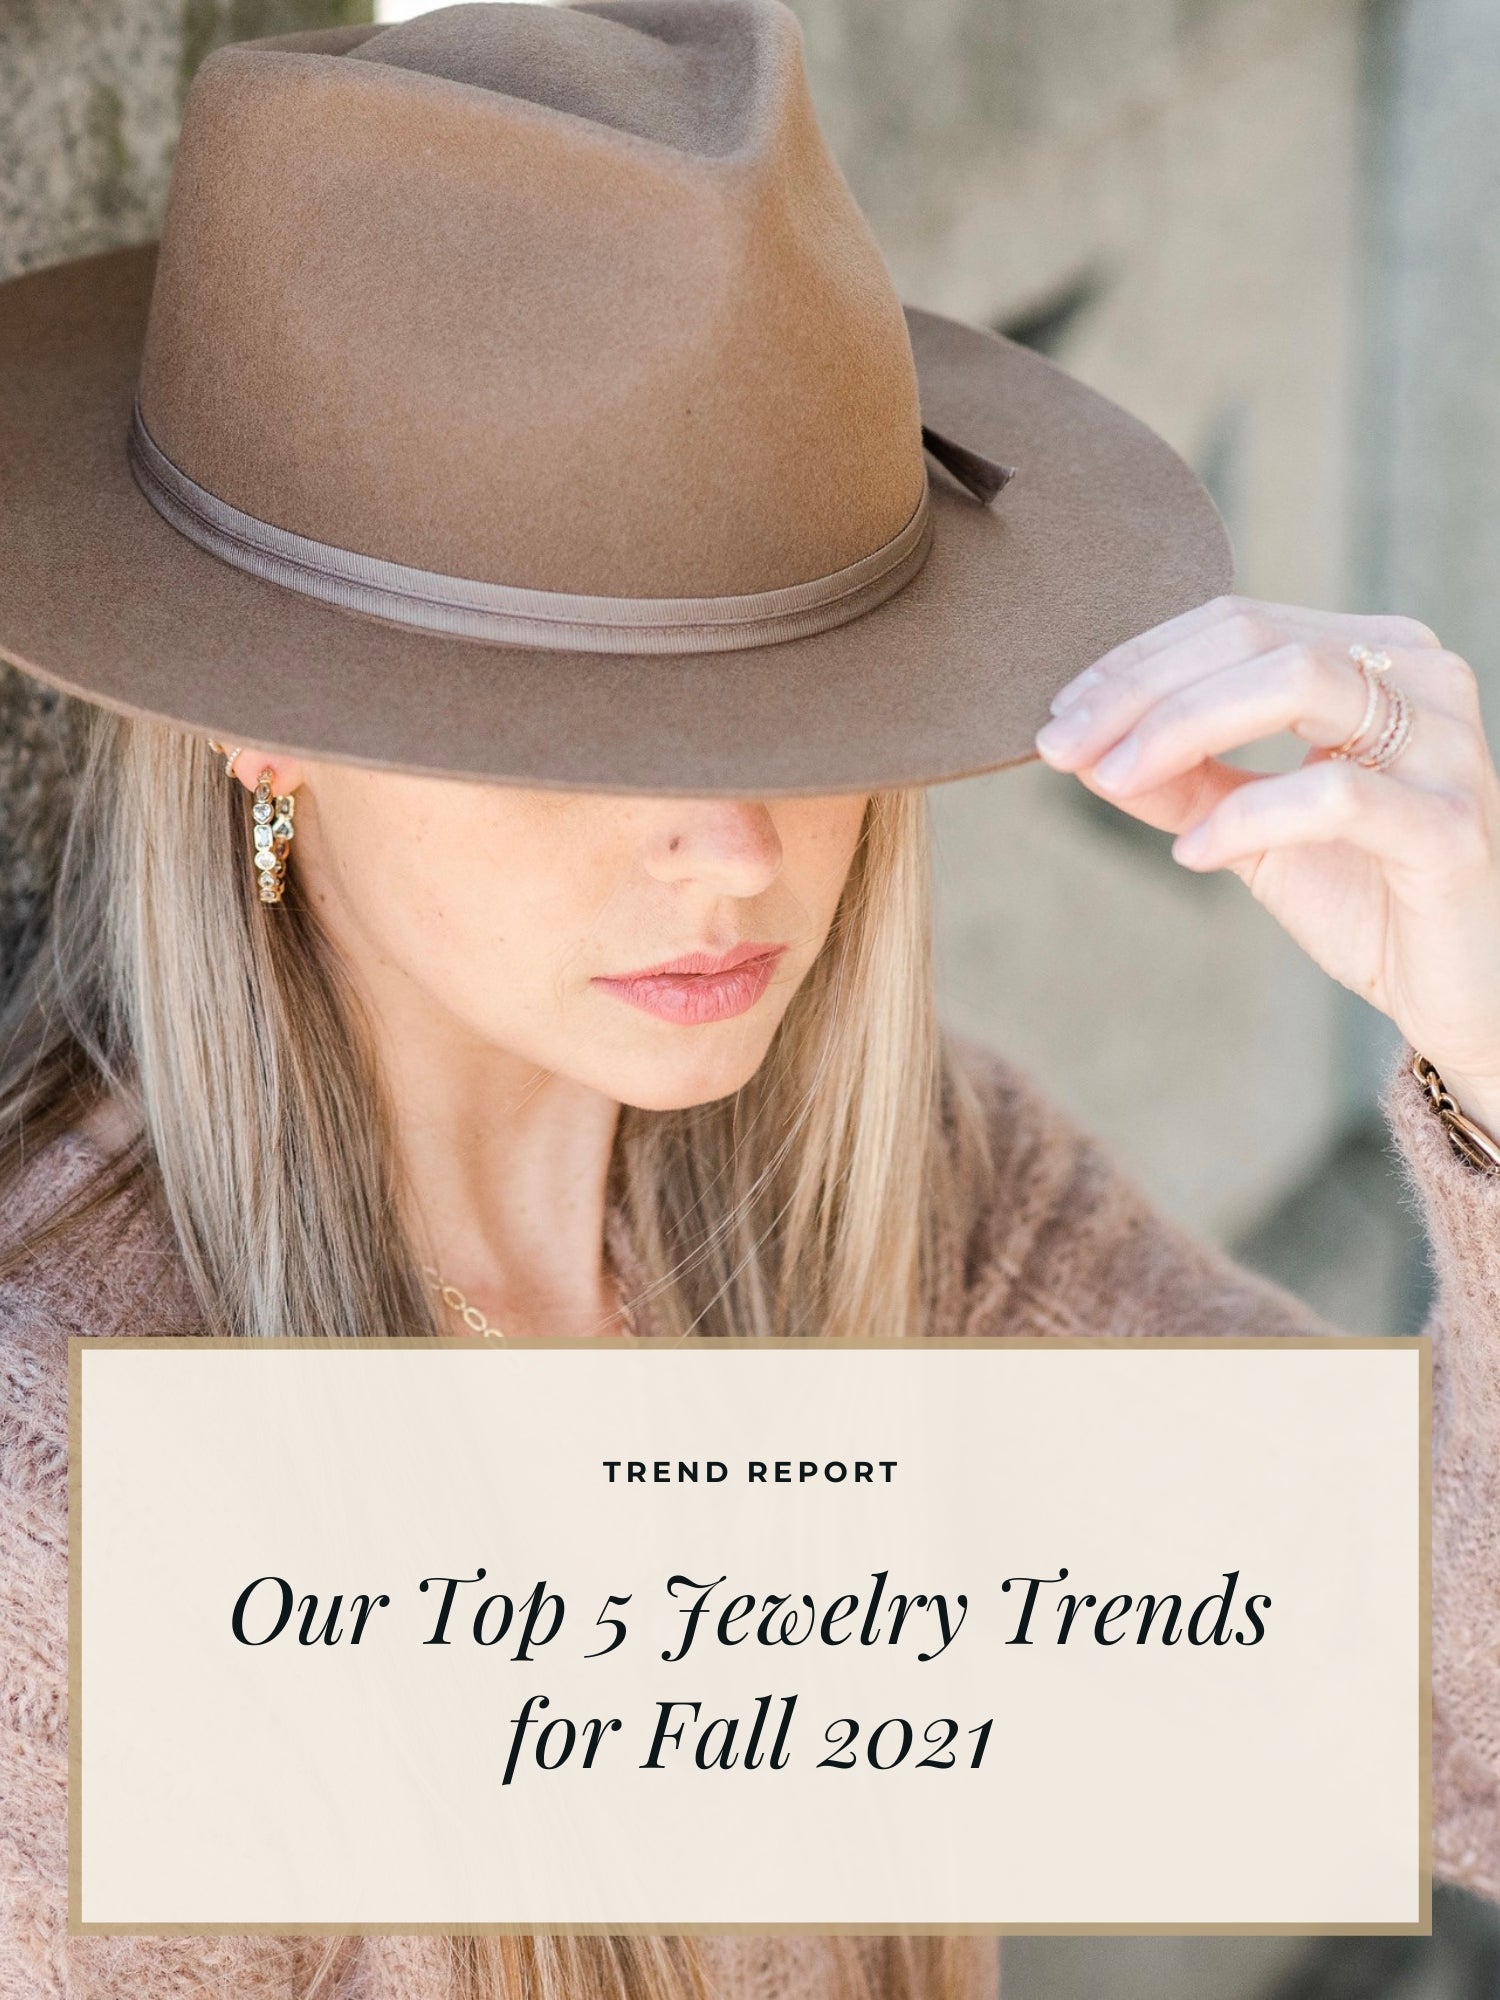 Our Top 5 Jewelry Trends for Fall 2021